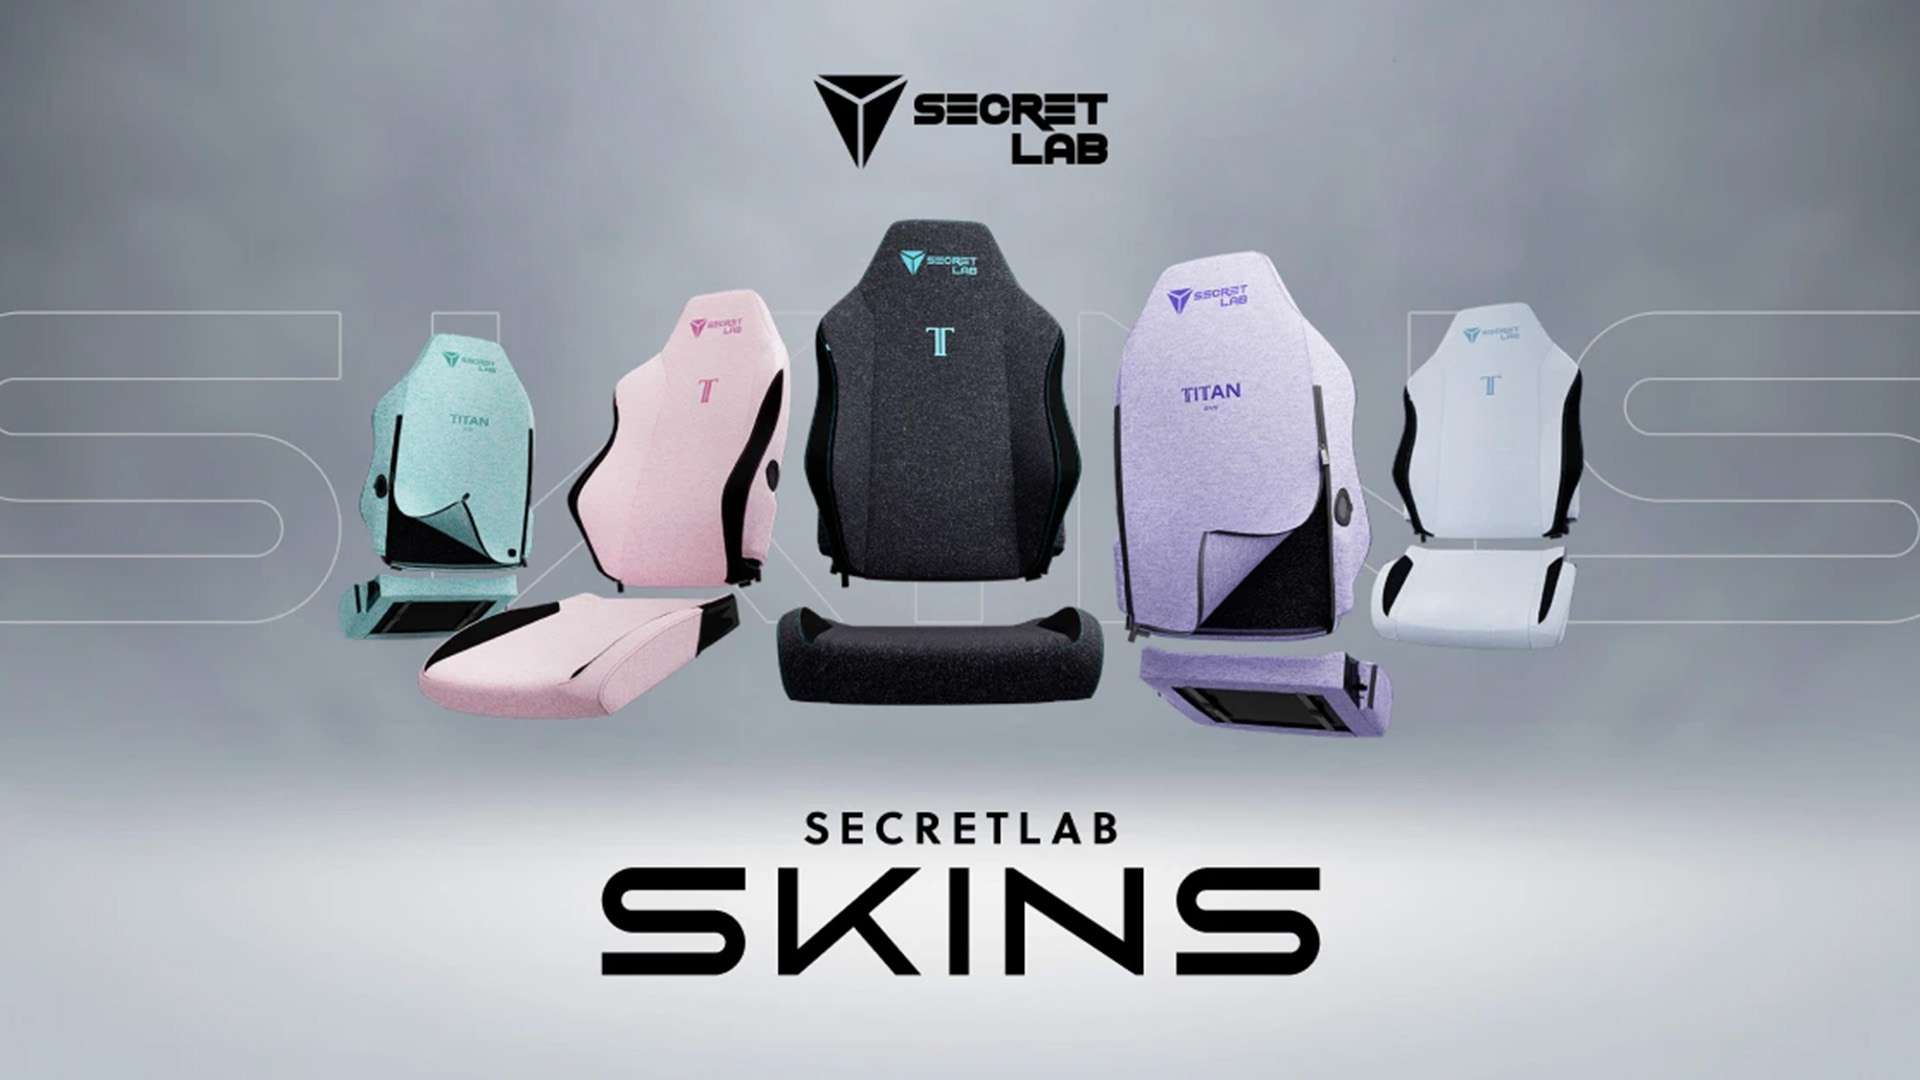 Secretlab Skins lineup showing the colors available at launch